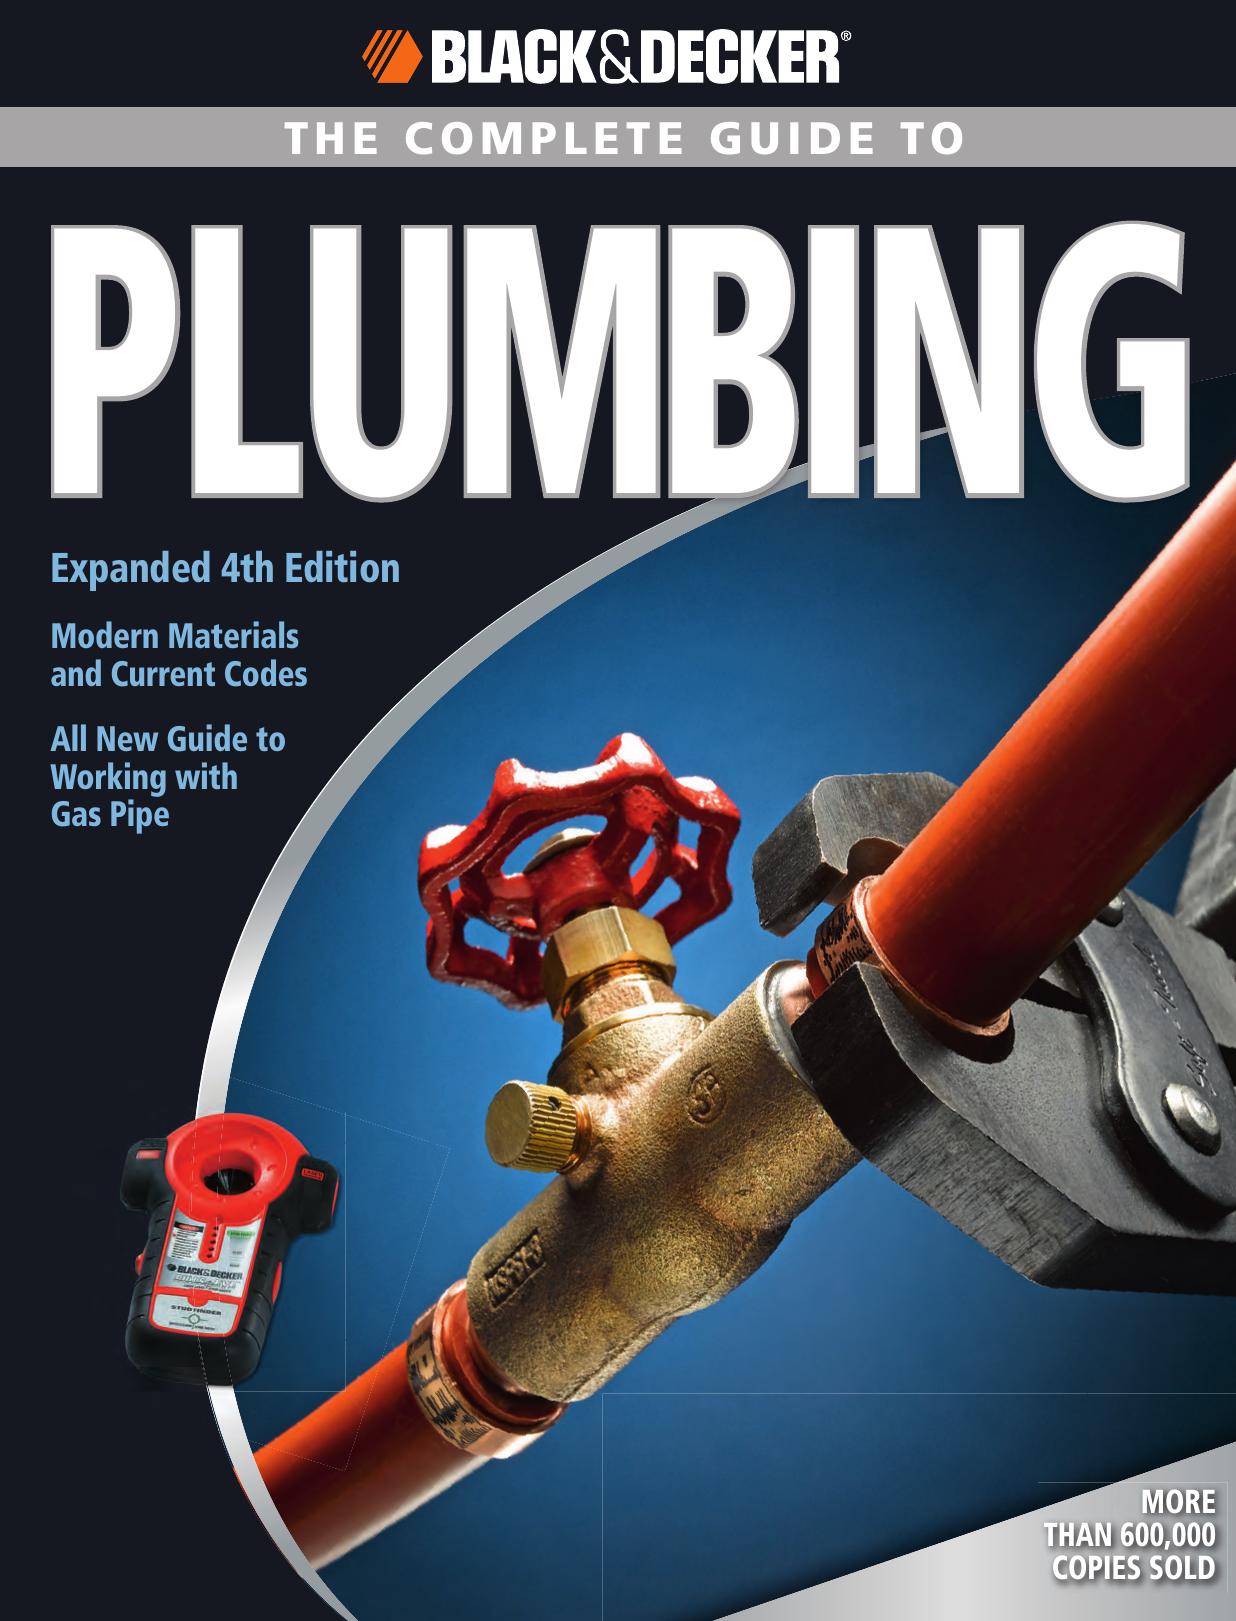 Black.and.Decker.Complete.Guide.to.Plumbing.Expanded 4th ed.BD 2008